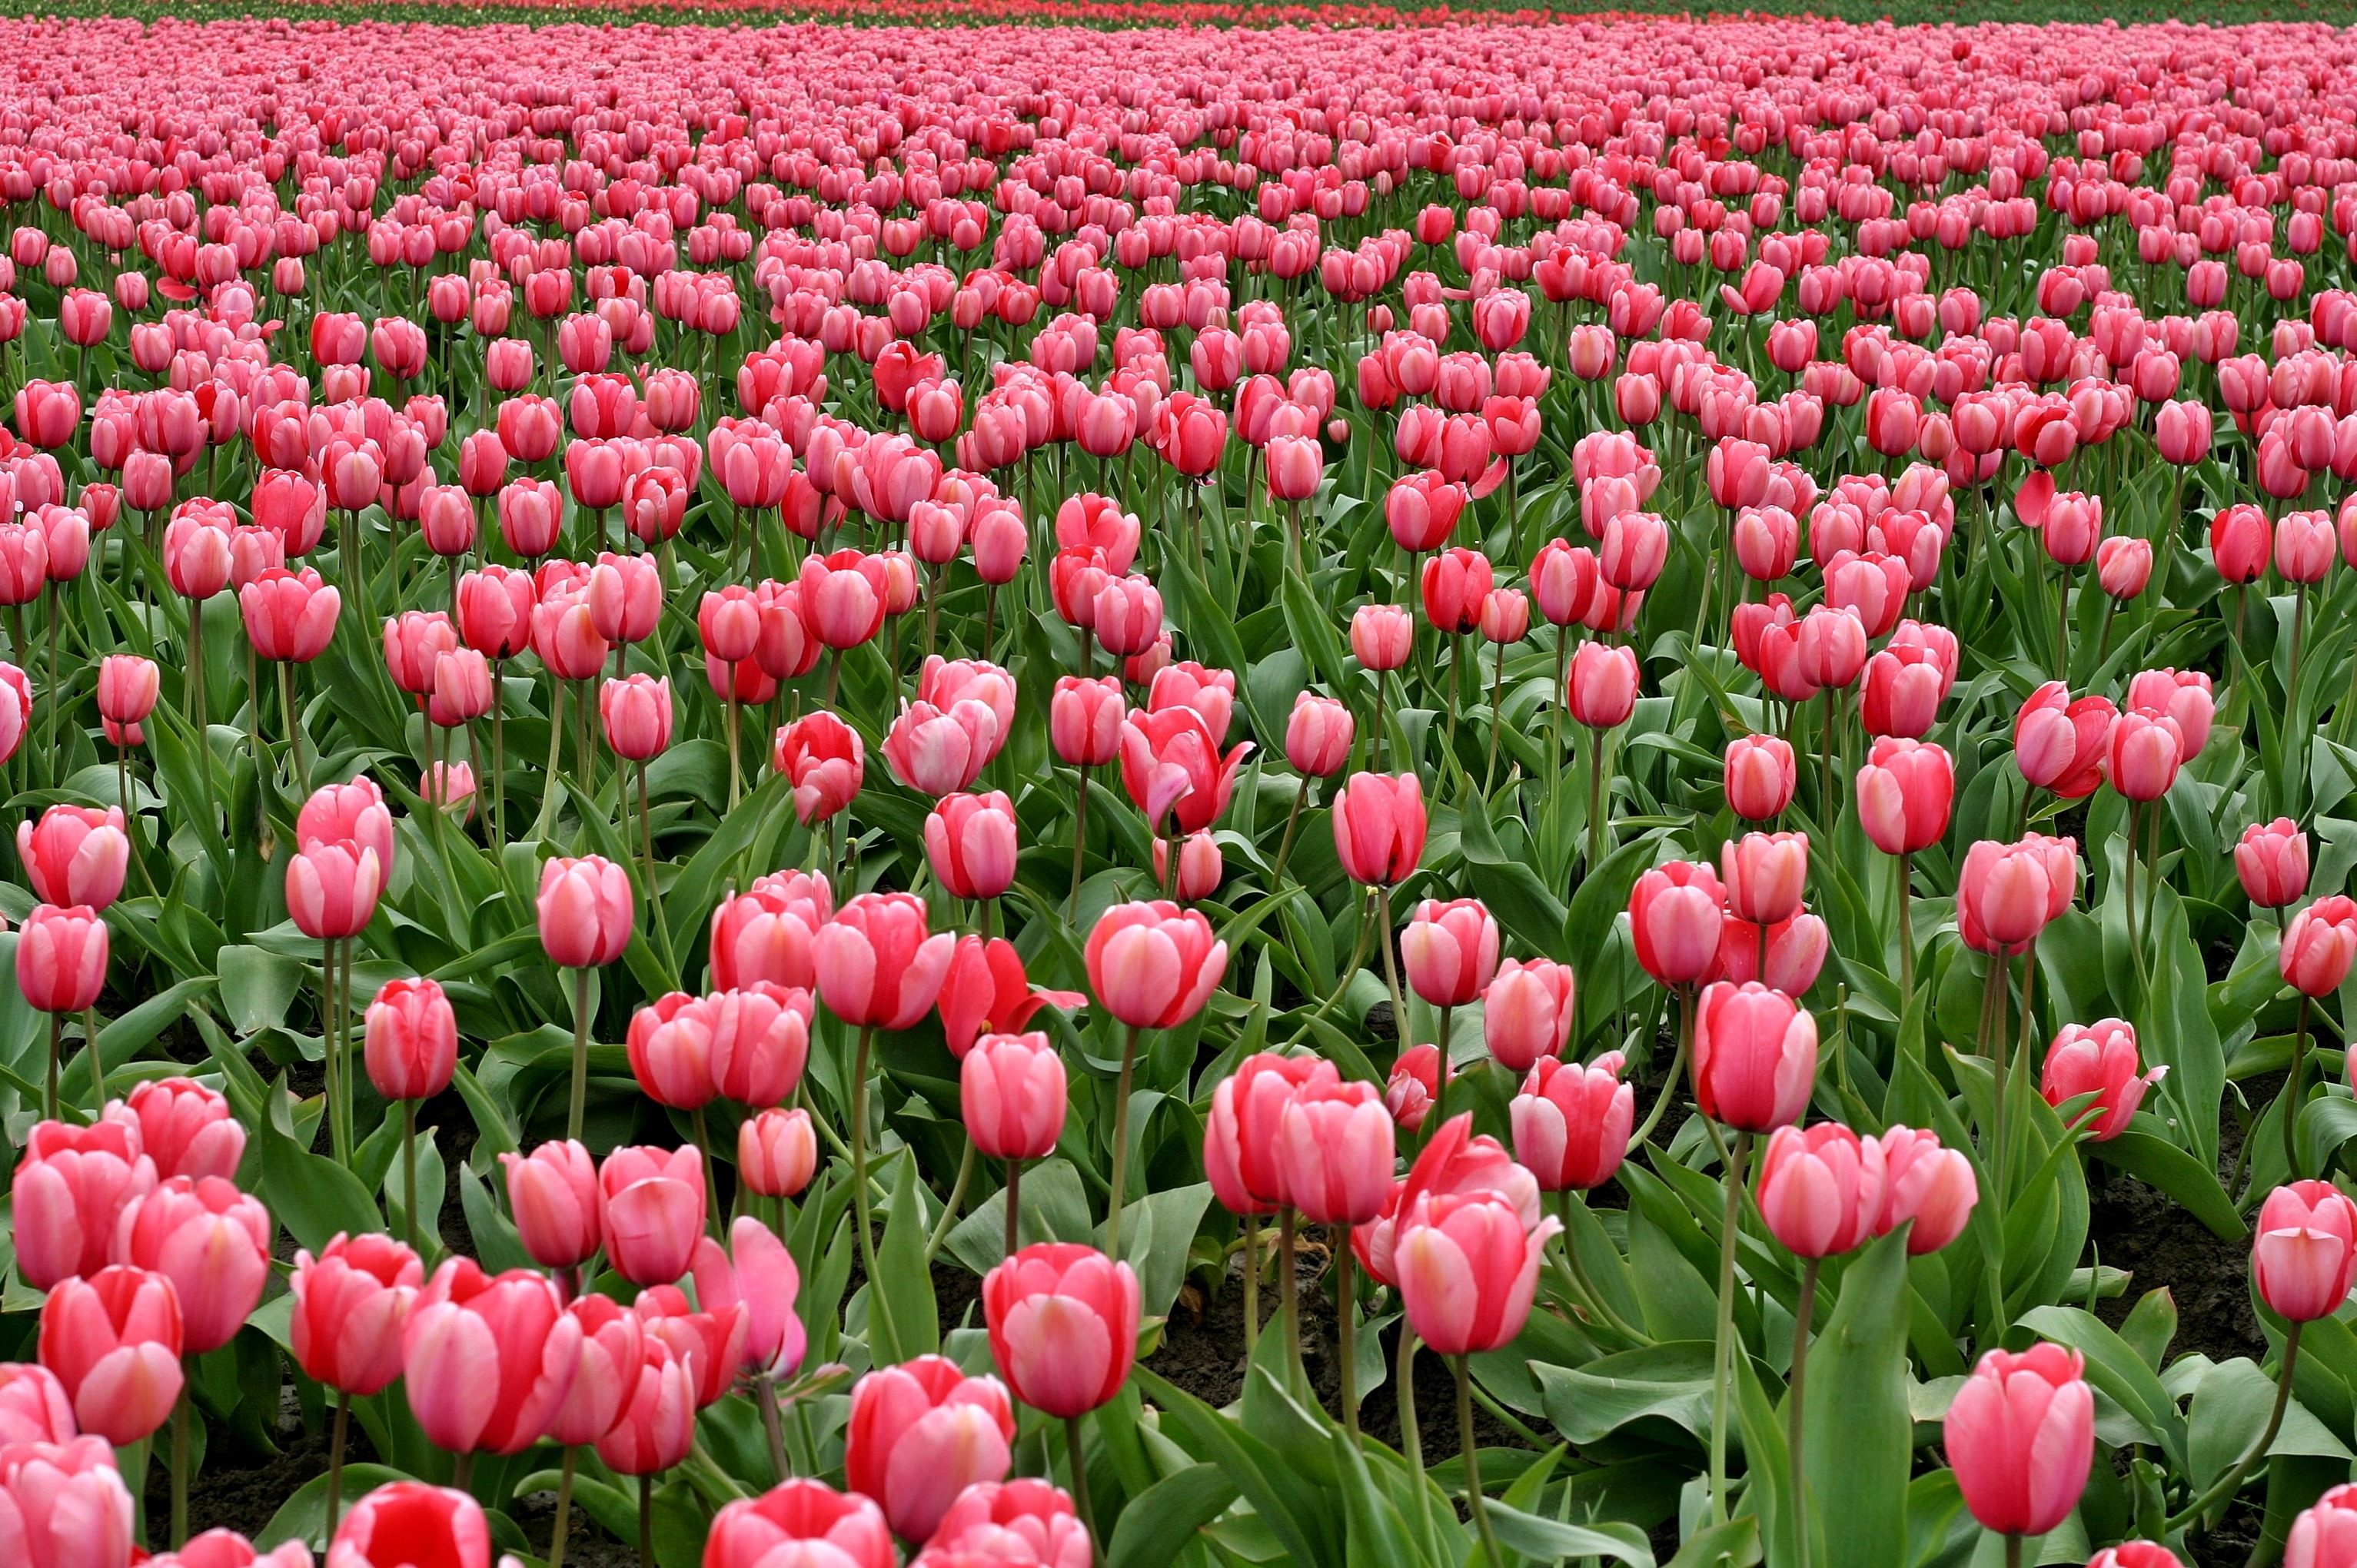 Free photo A large field of pink tulips.